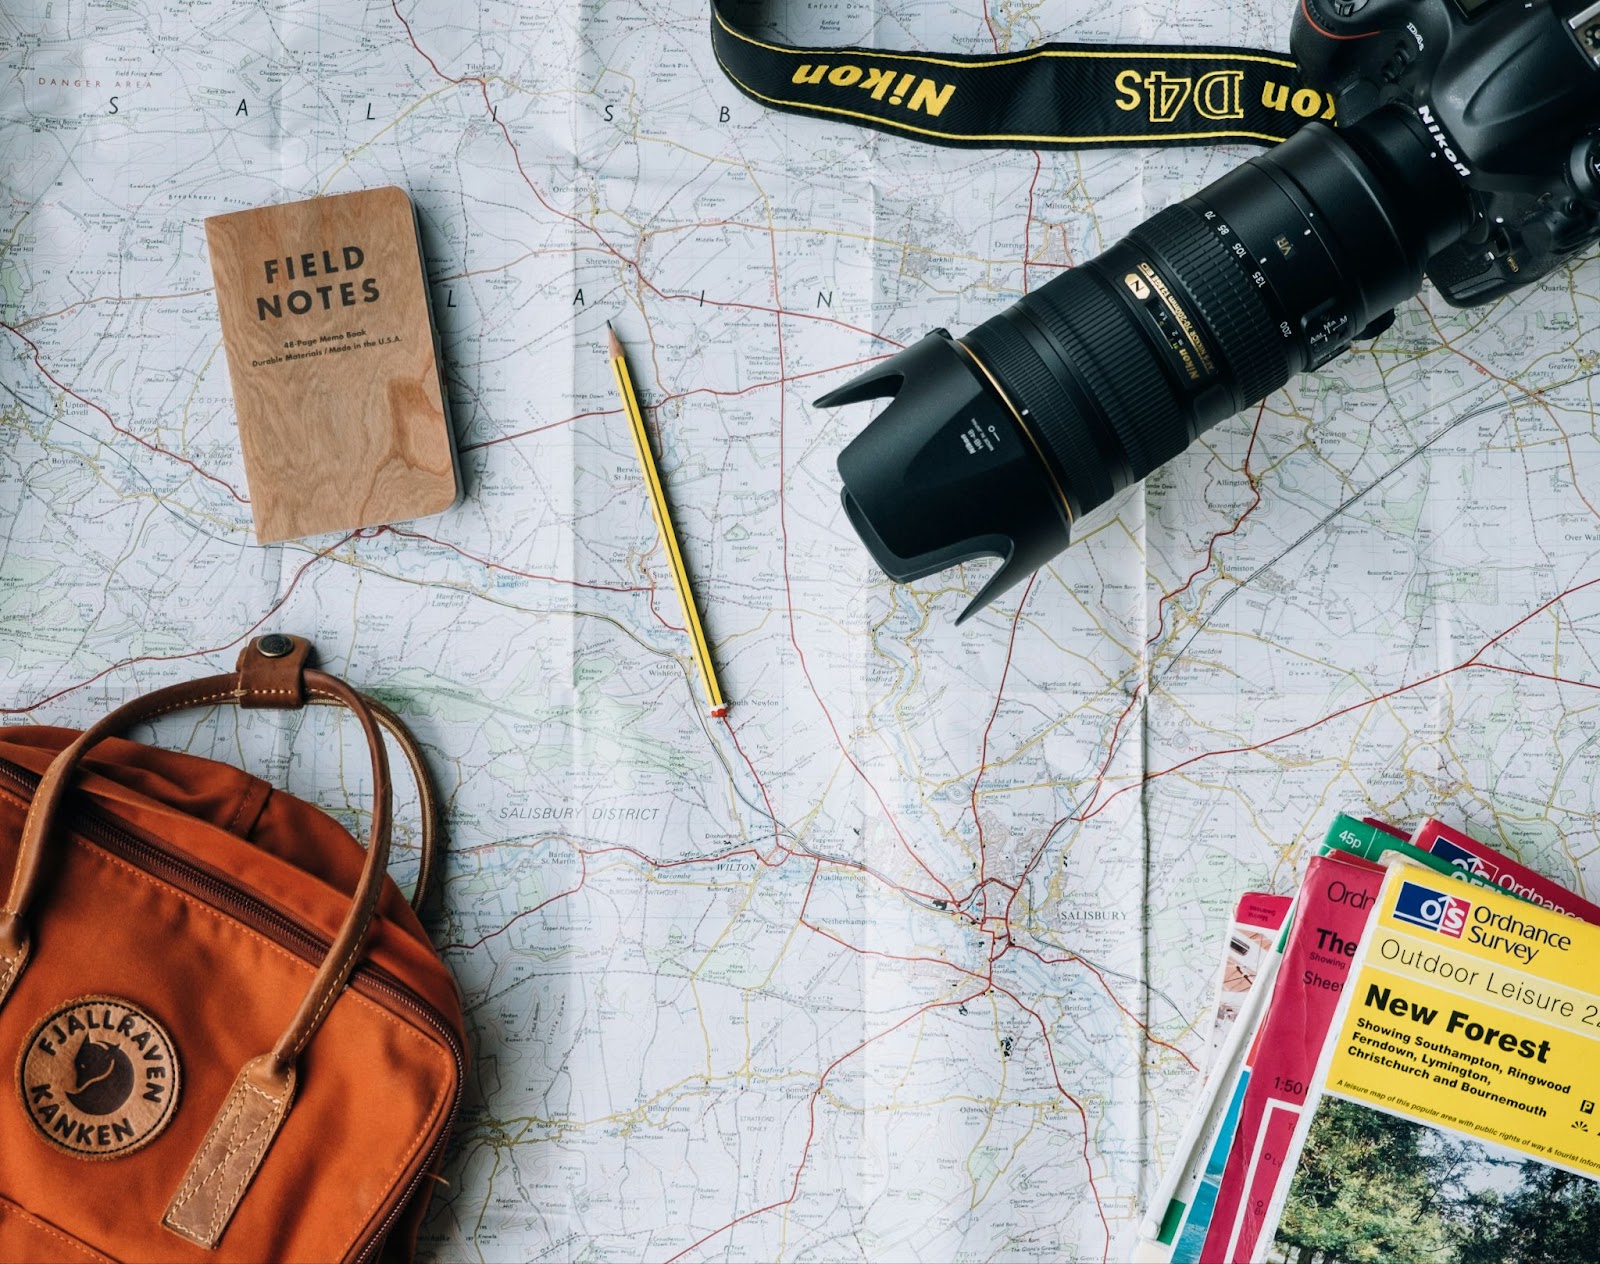 Camera and guidebooks over map